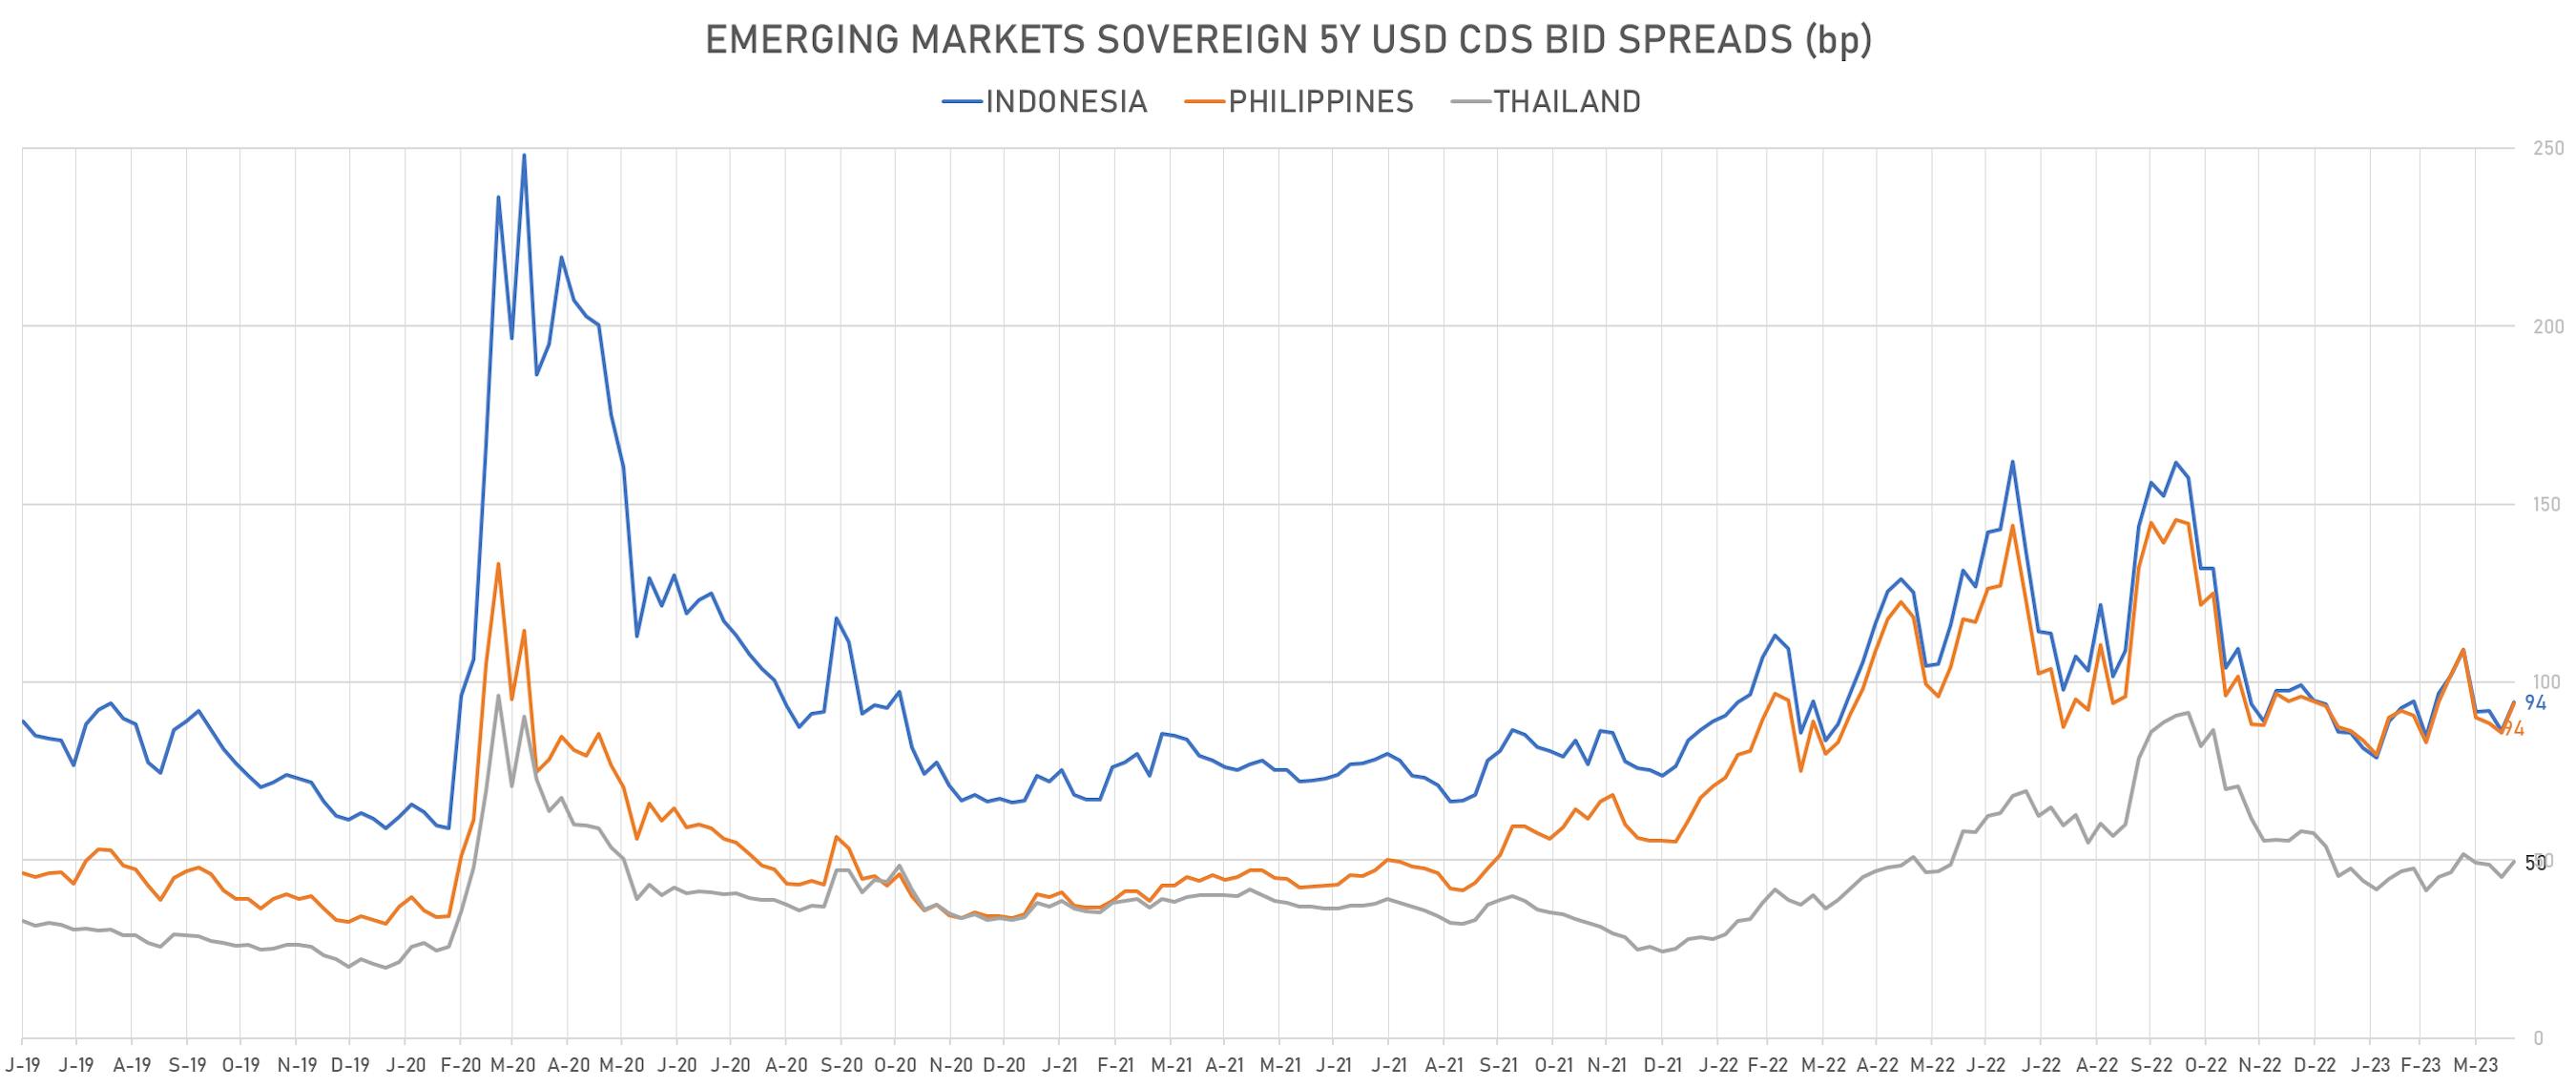 Sovereign 5Y USD CDS Spreads | Sources: phipost.com, Refinitiv data 